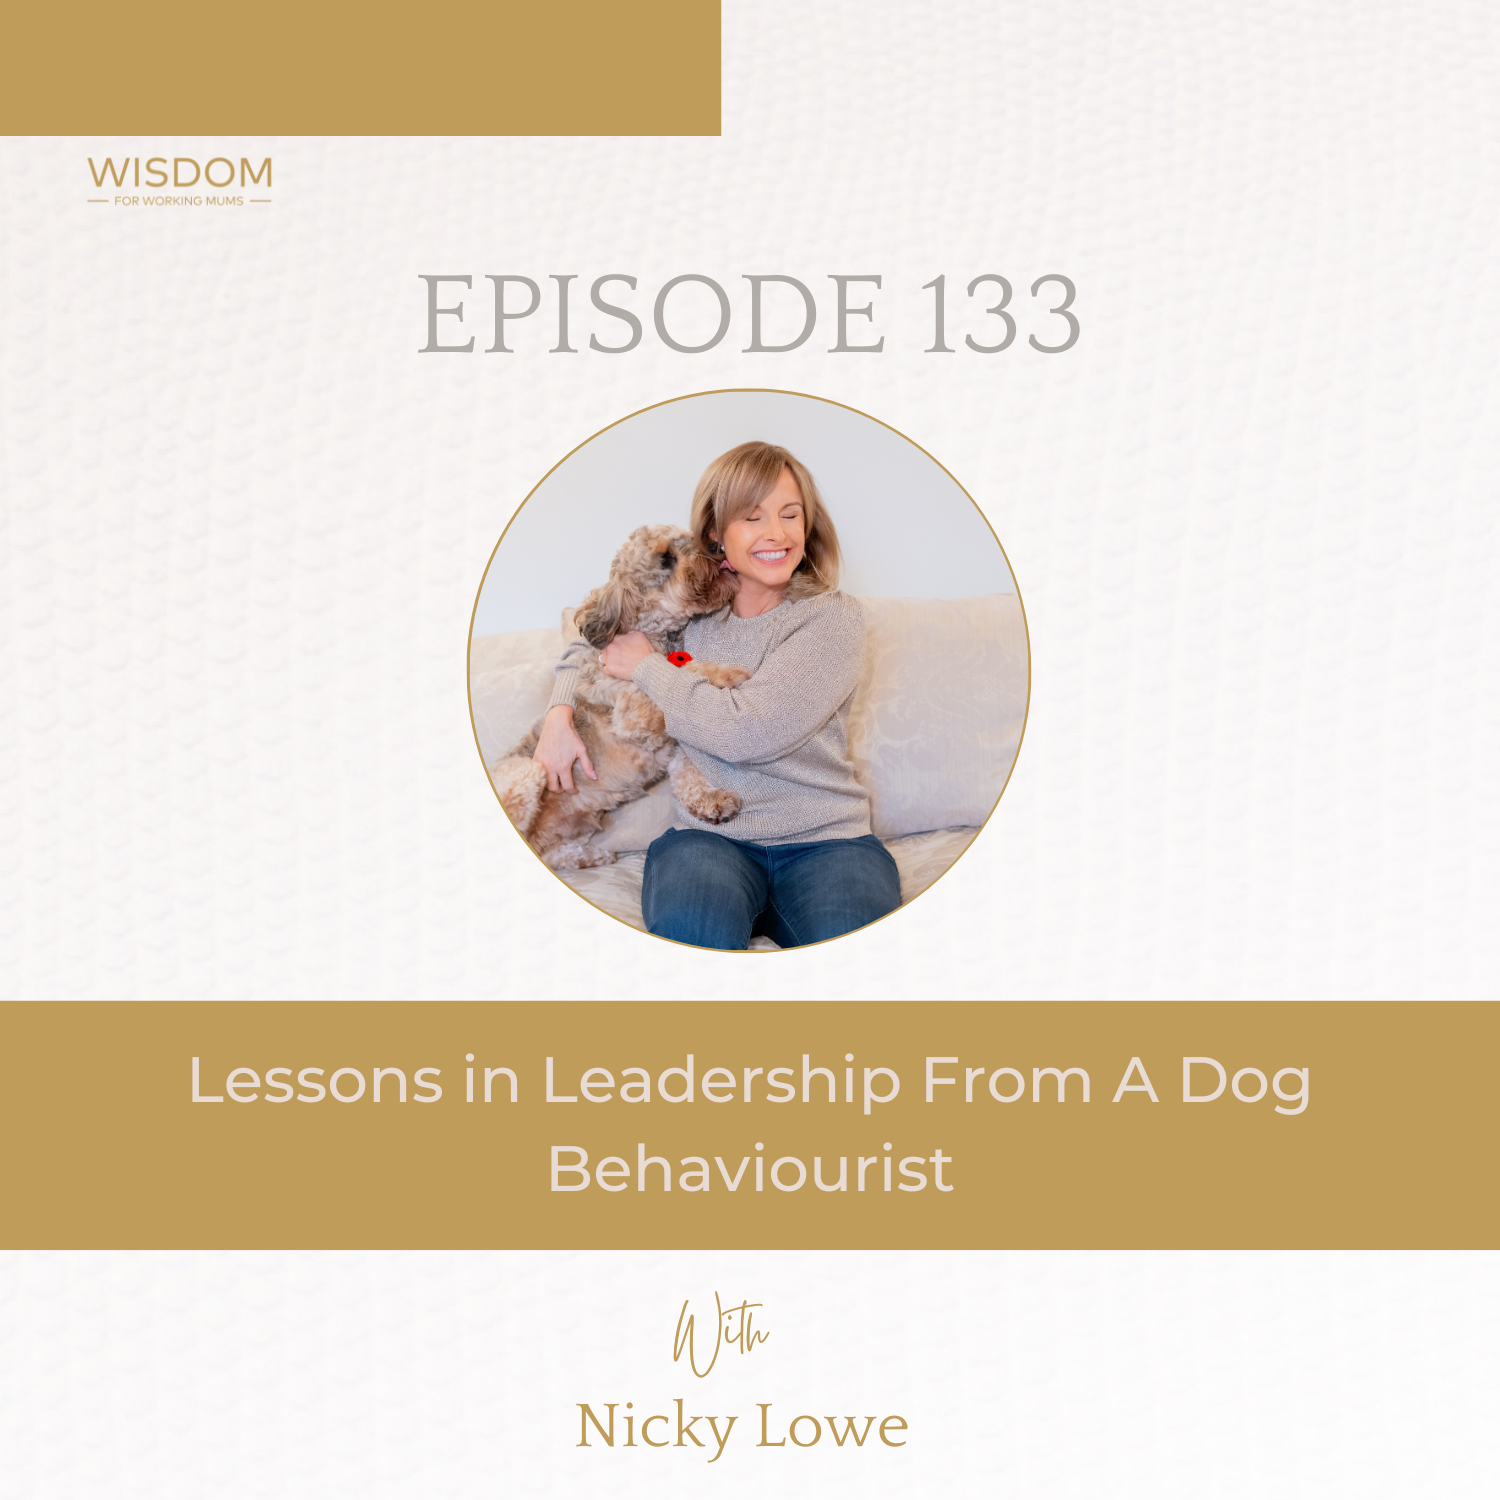 5 Lessons in Leadership From A Dog Behaviourist